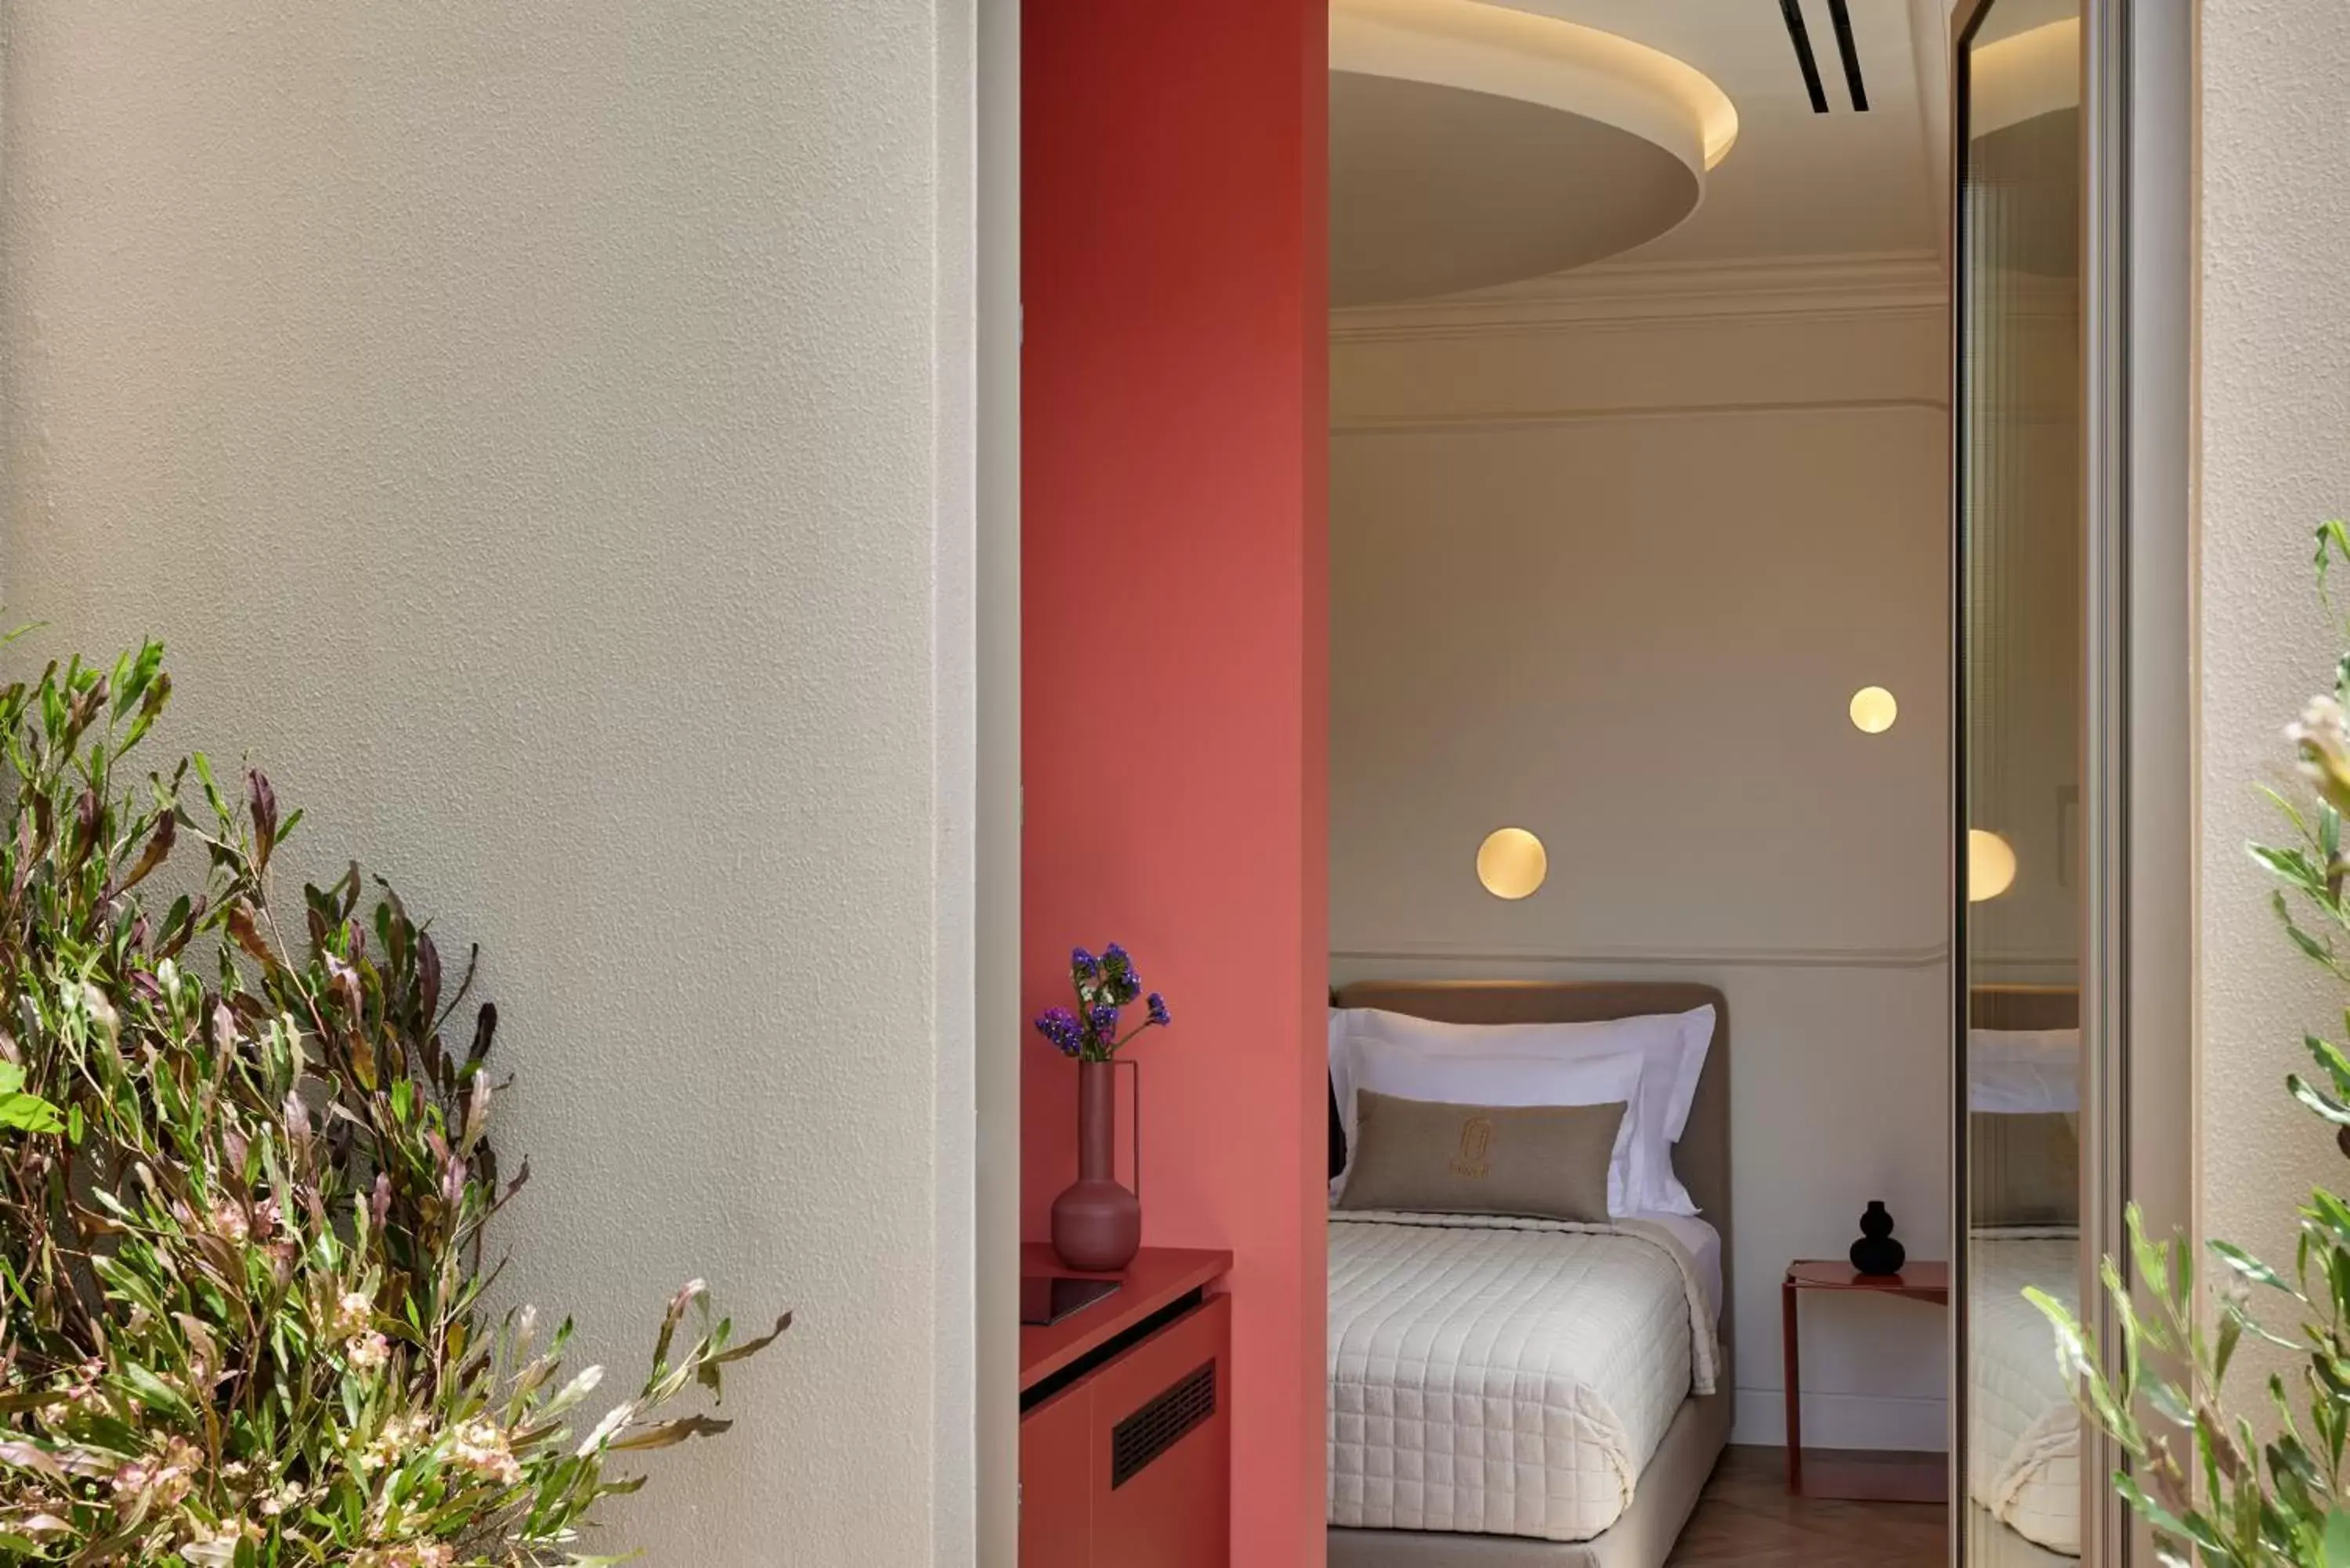 DWELL - Elegant City Stay - Brand new boutique hotel